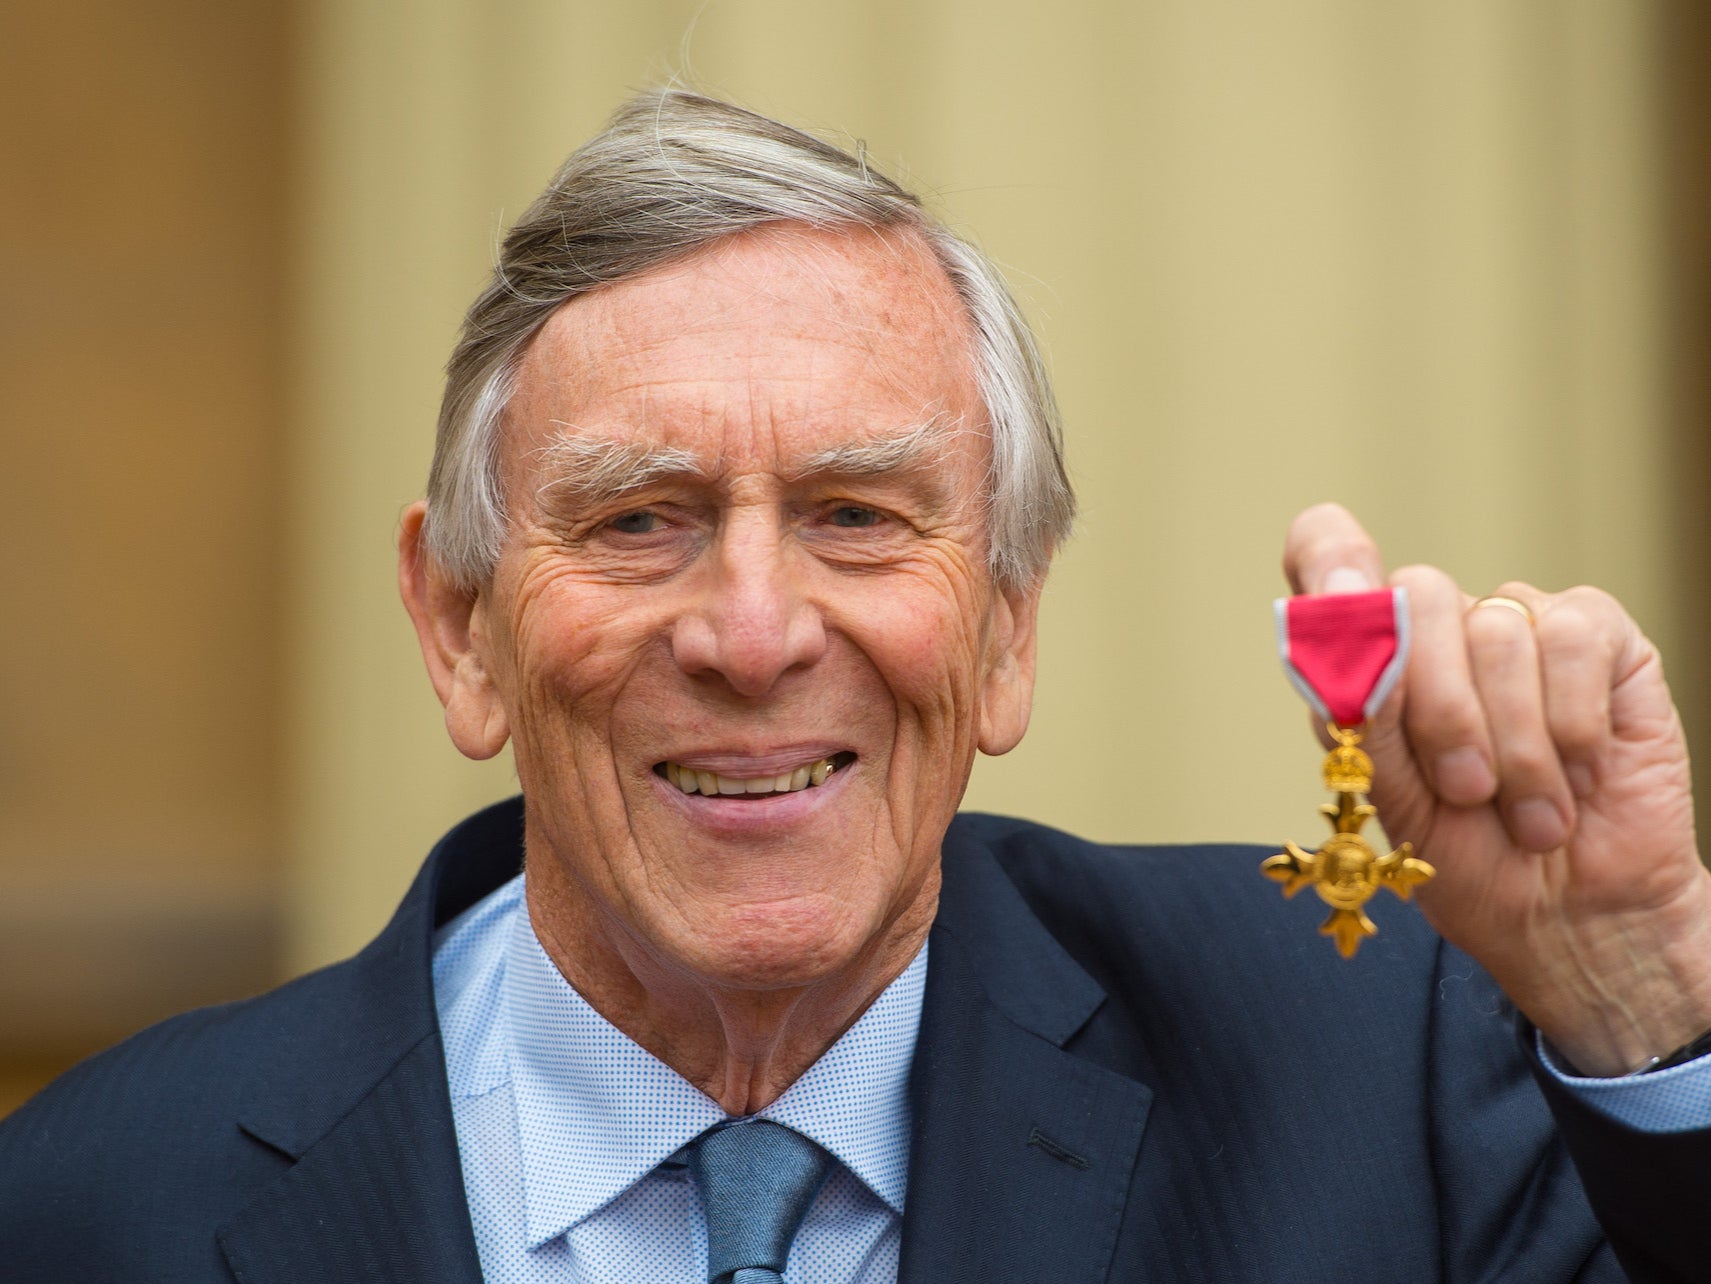 Piers Haggard with his Officer of the Order of the British Empire (OBE) medal